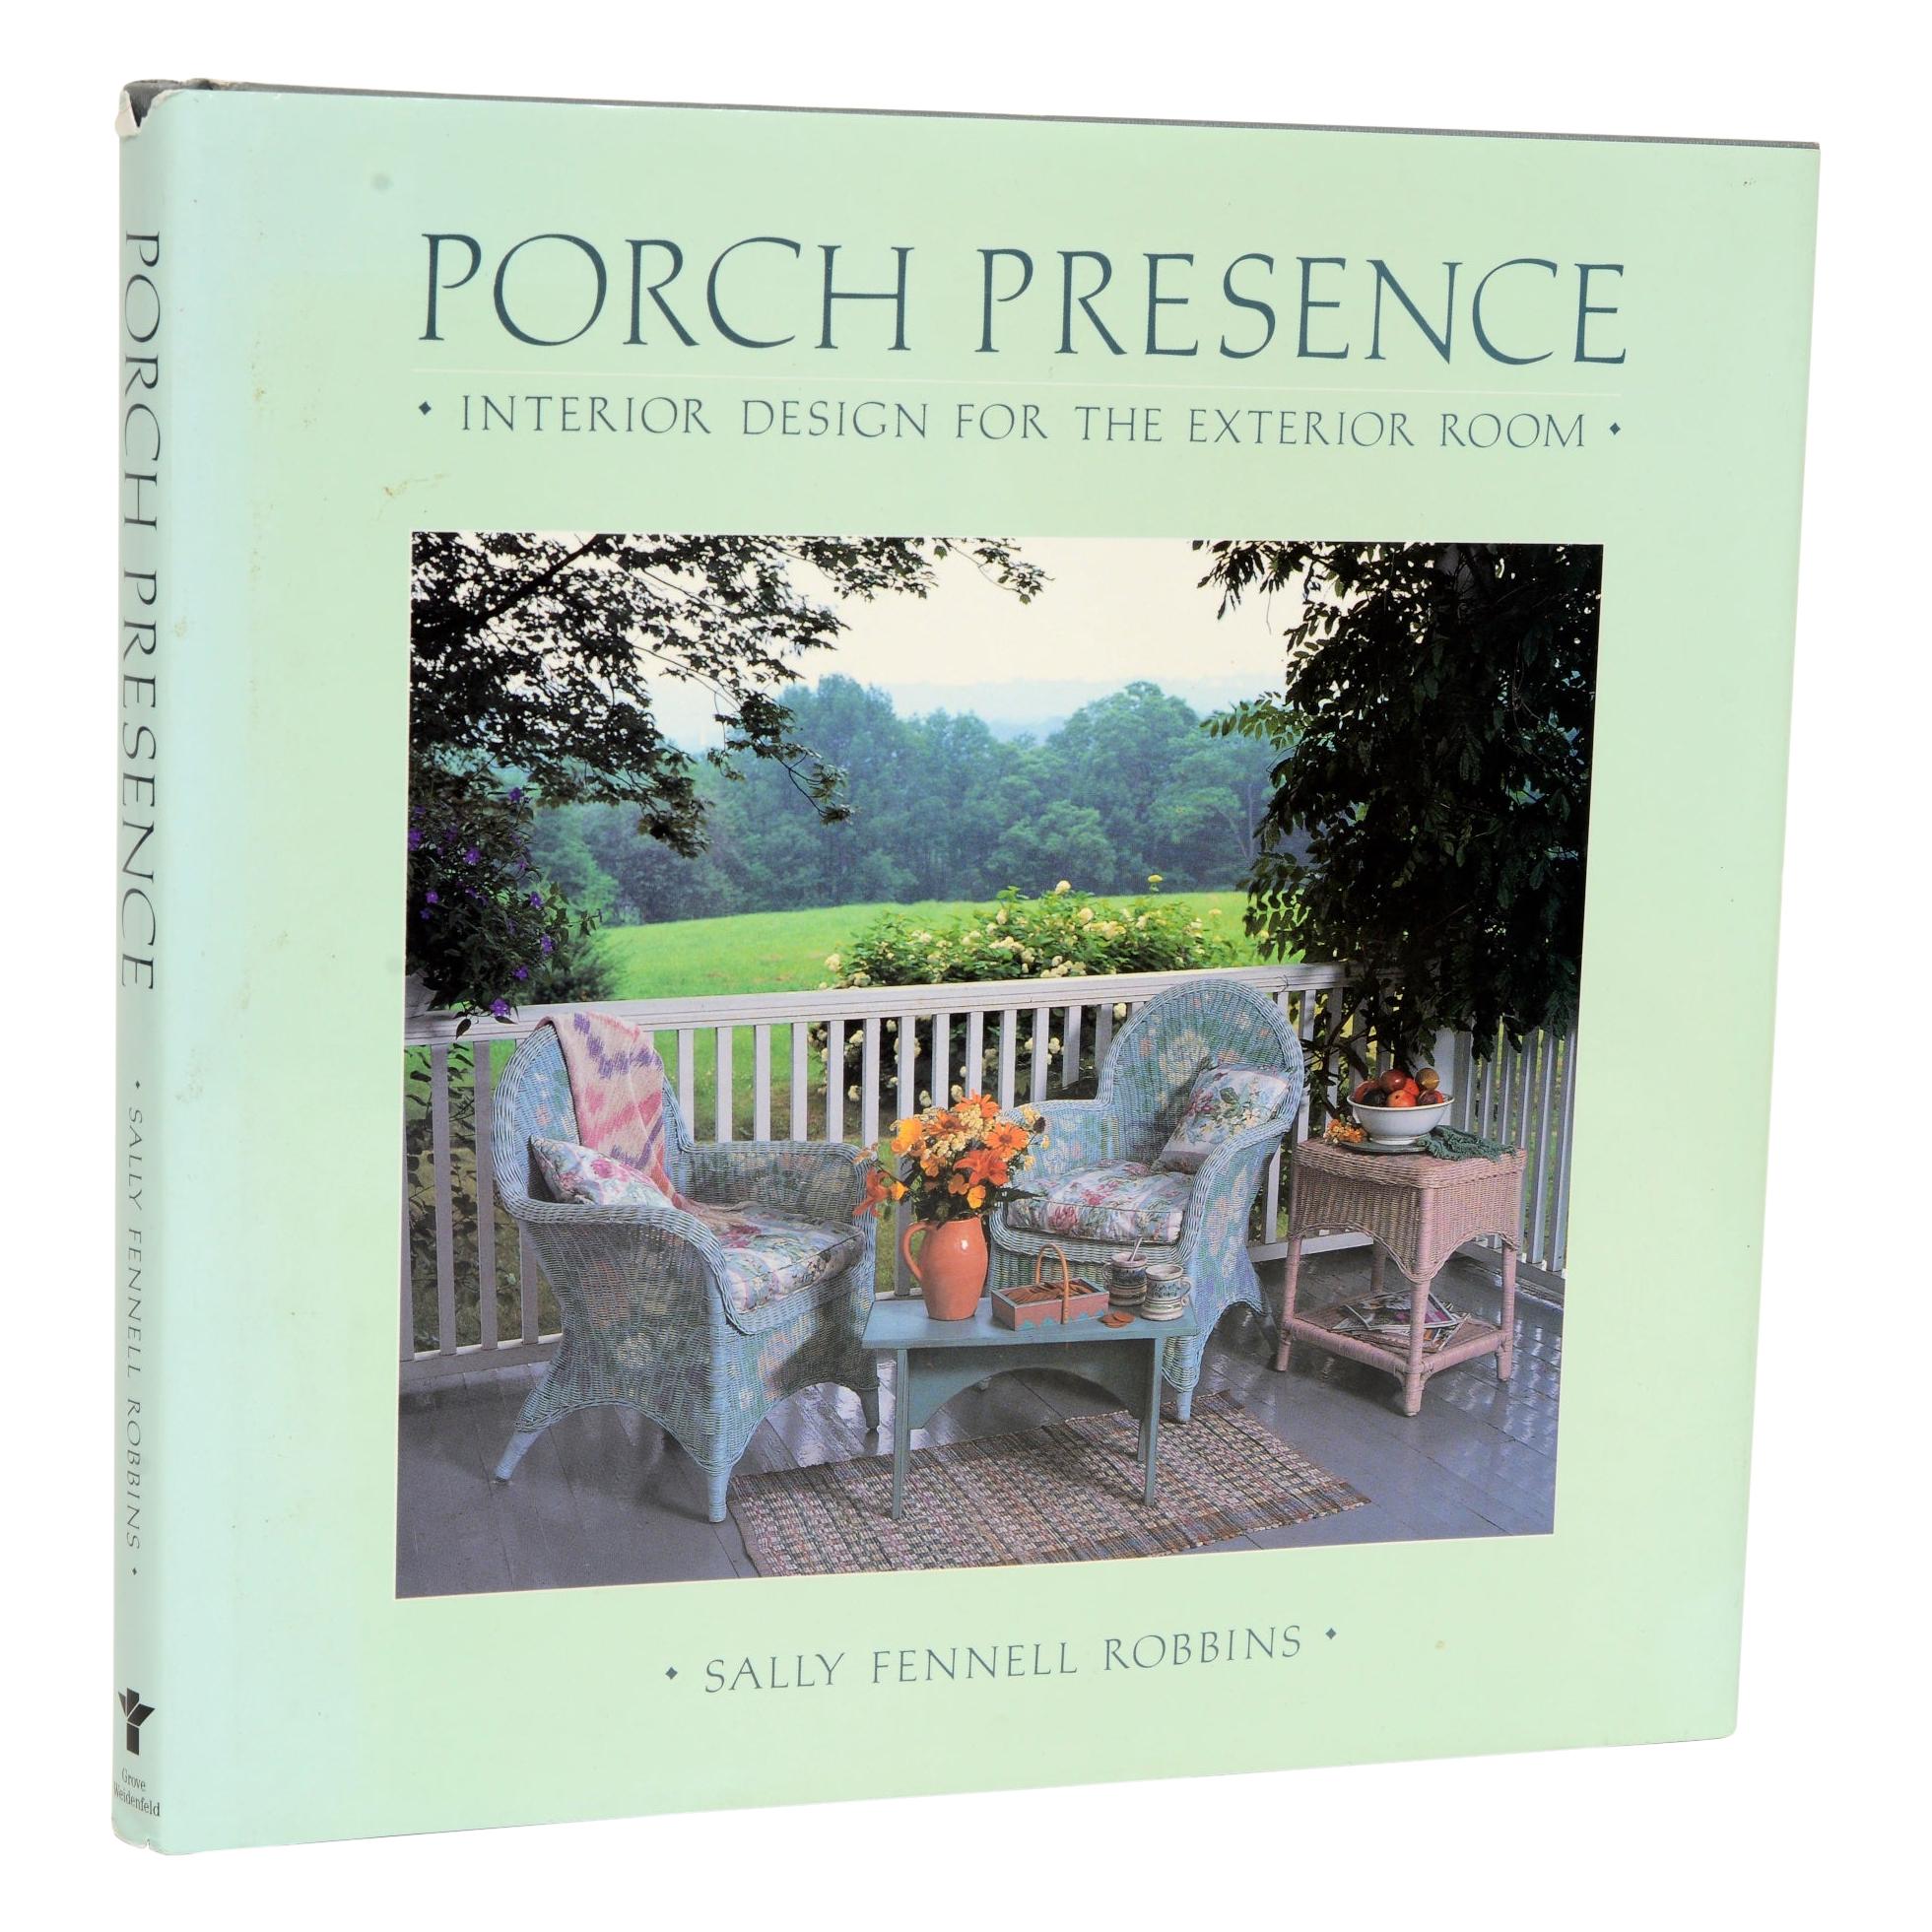 Porch Presence Interior Design for the Exterior Room, Sally Fennell, 1st Edition For Sale